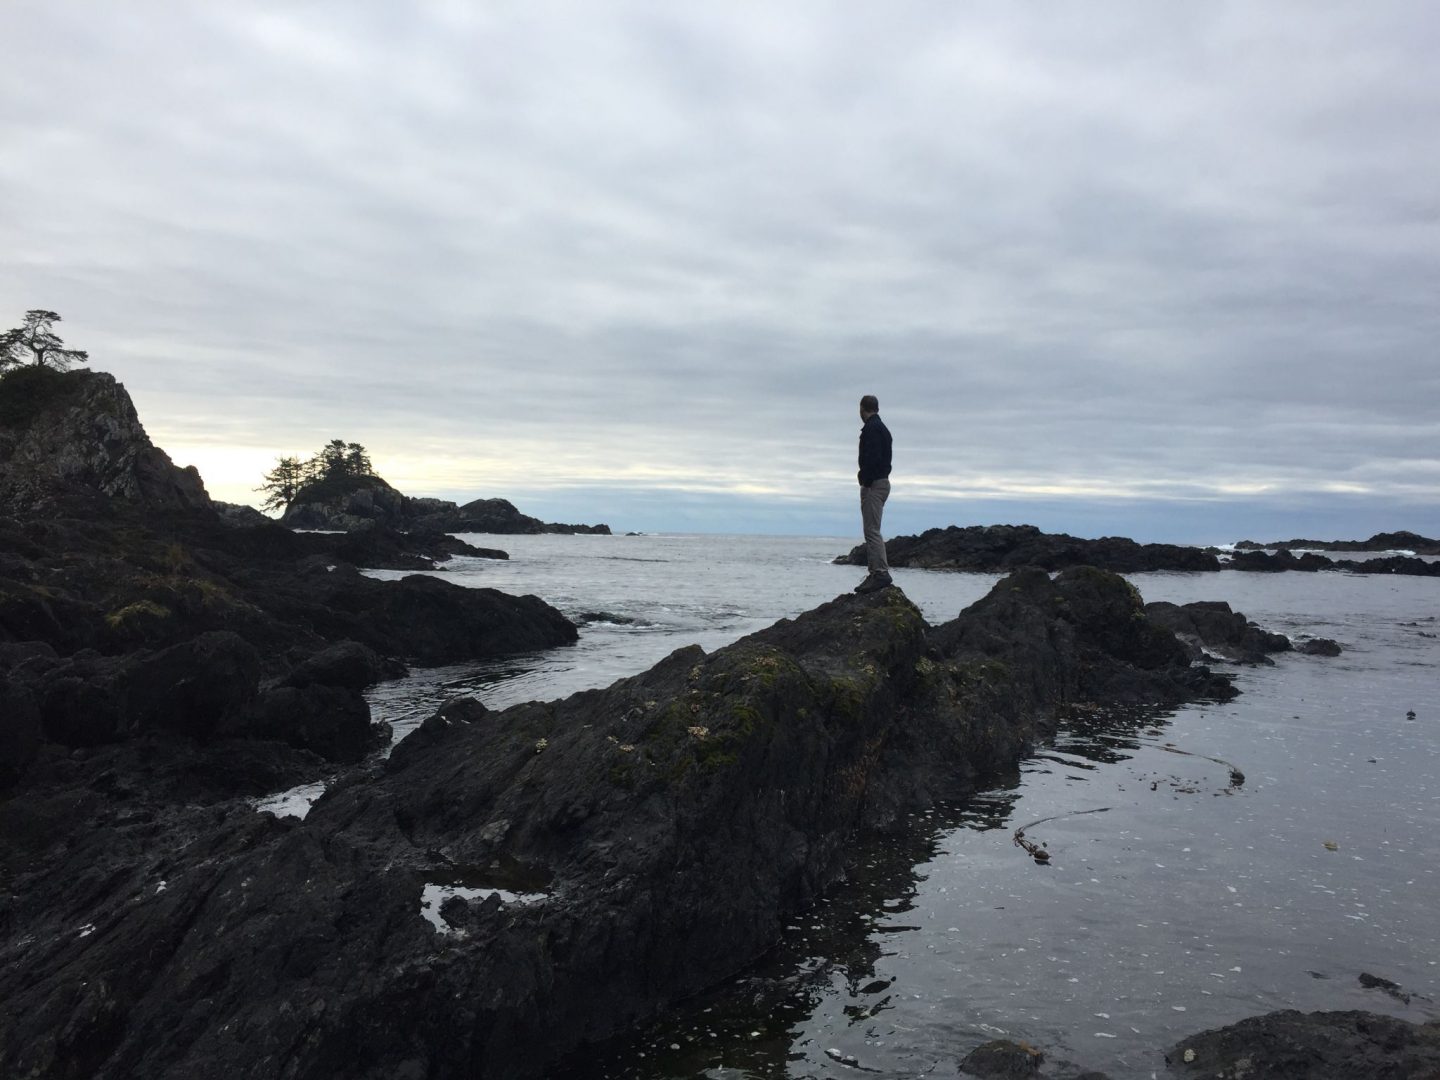 Scaling the rocks of the Wild Pacific Trail near Ucluelet